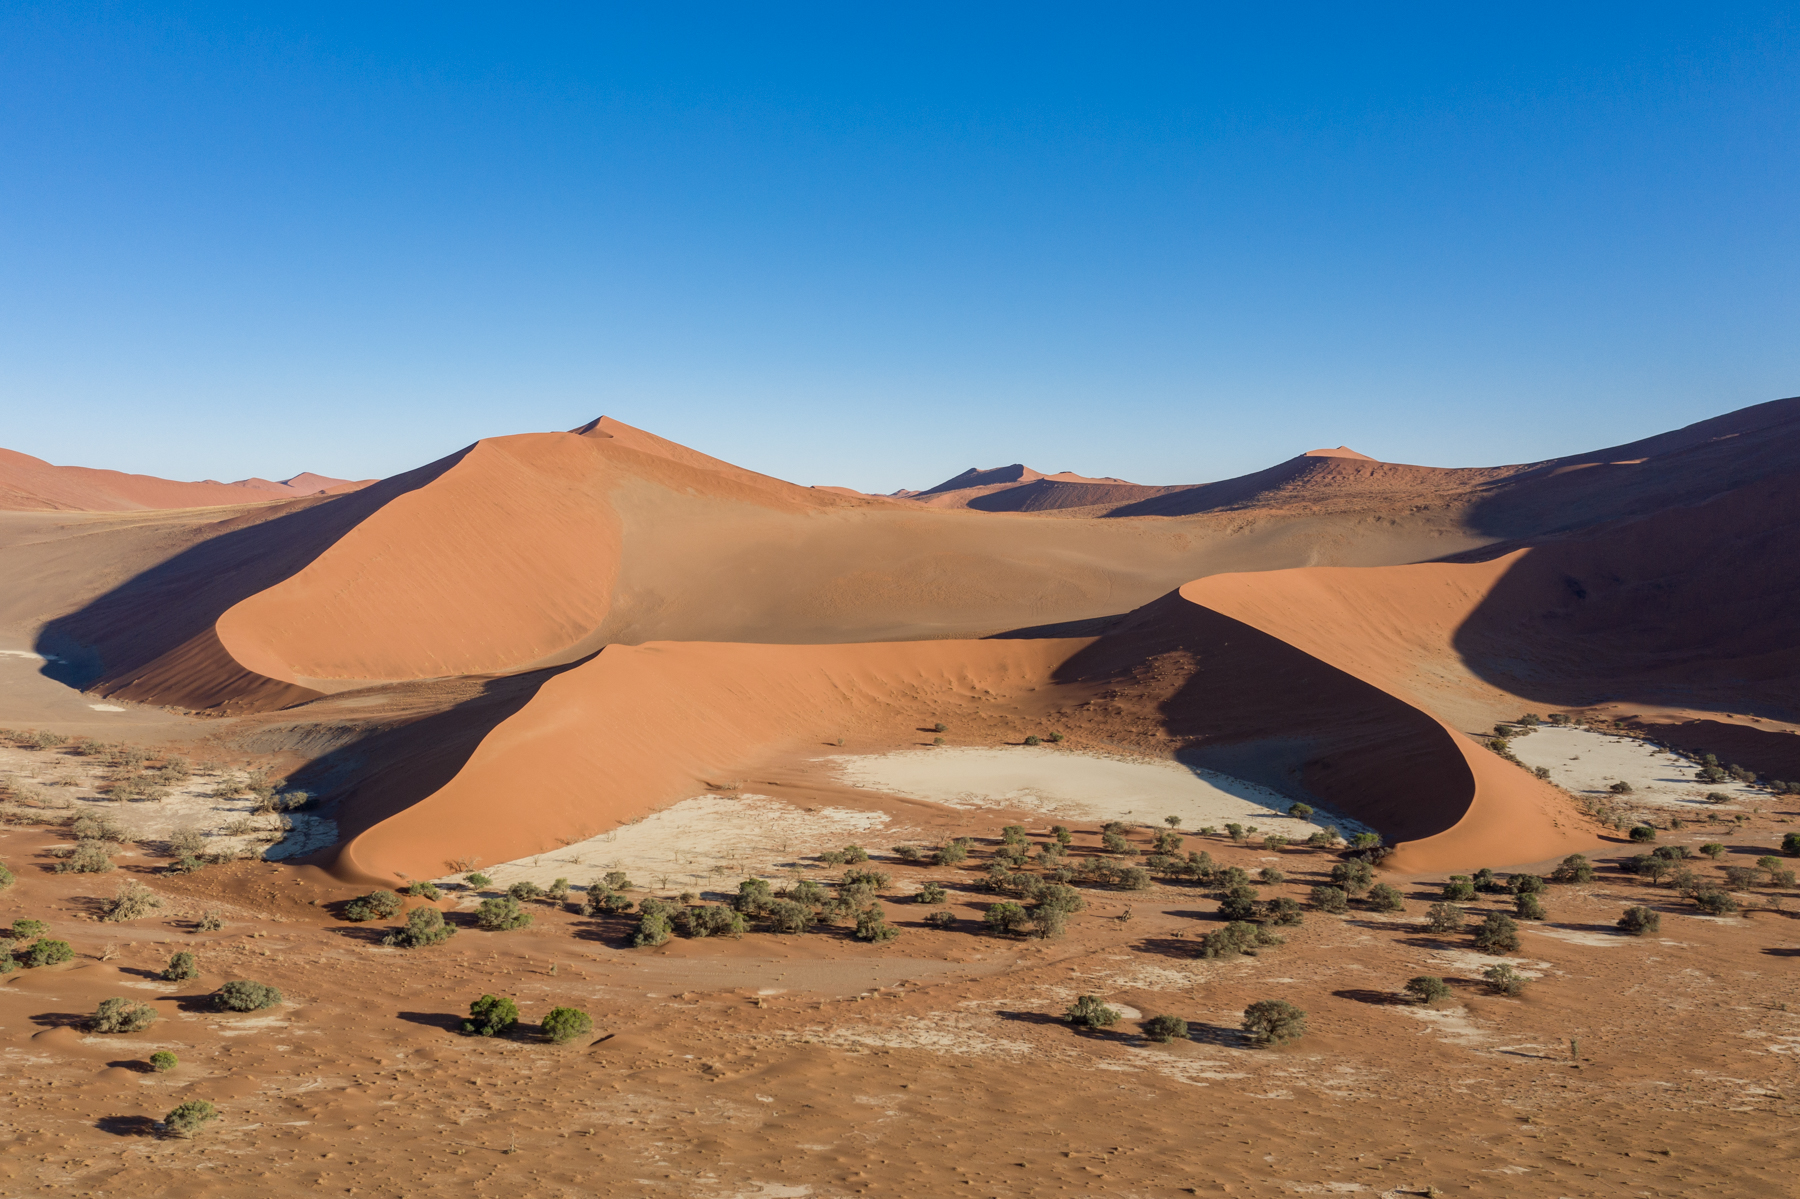 Stunning Sossusvlei - everywhere you turn there are beautiful images!